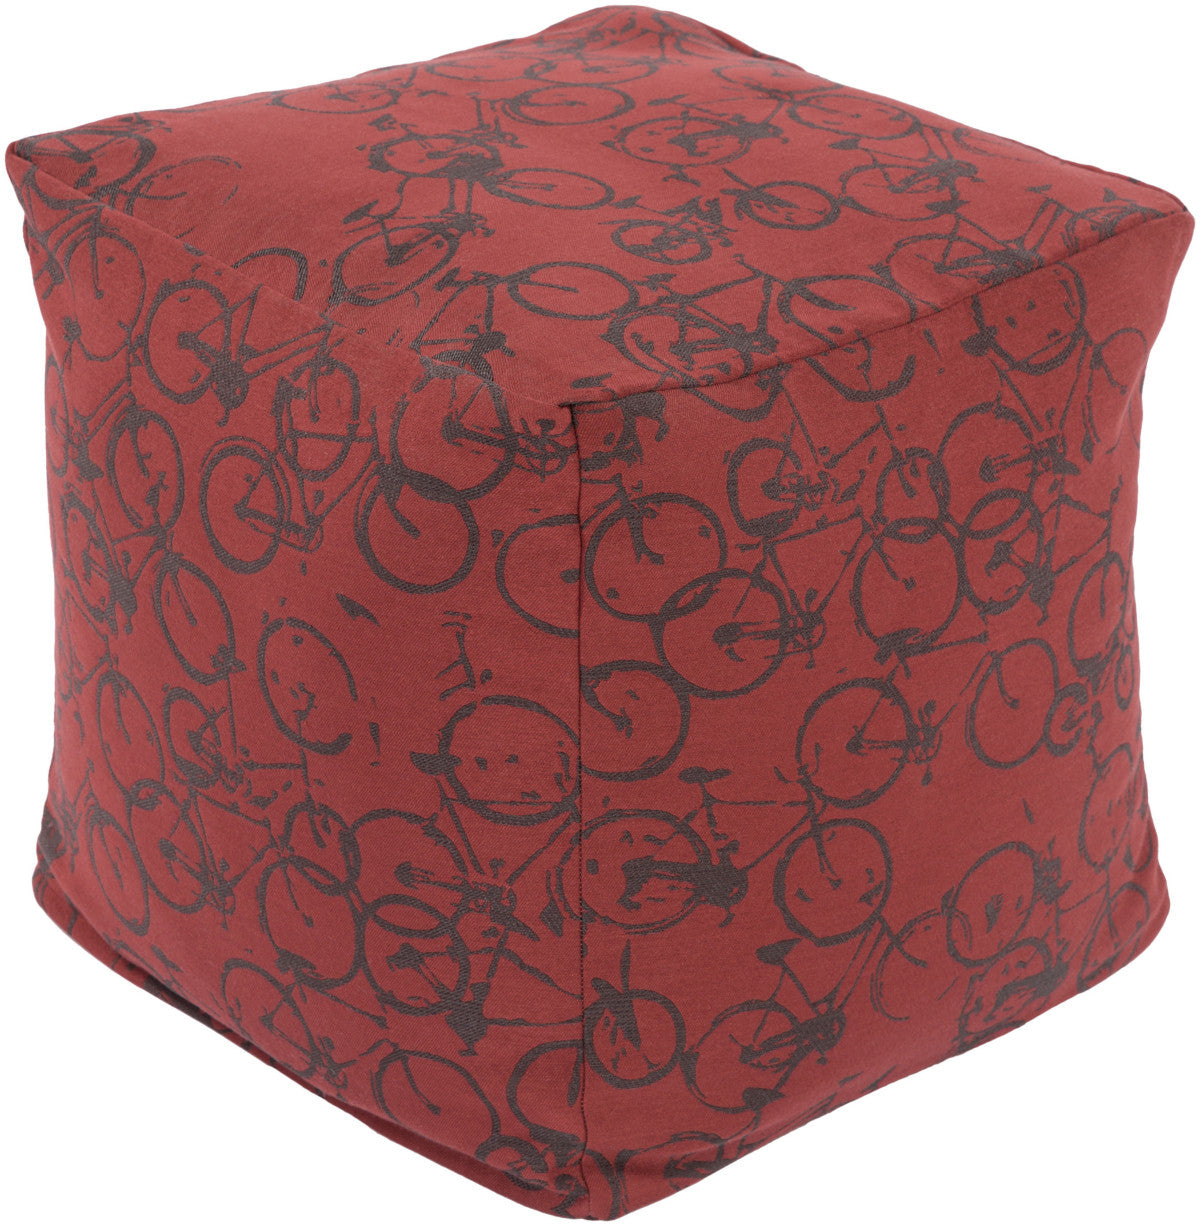 Surya Peddle Power PDPF-006 Red Pouf by Mike Farrell